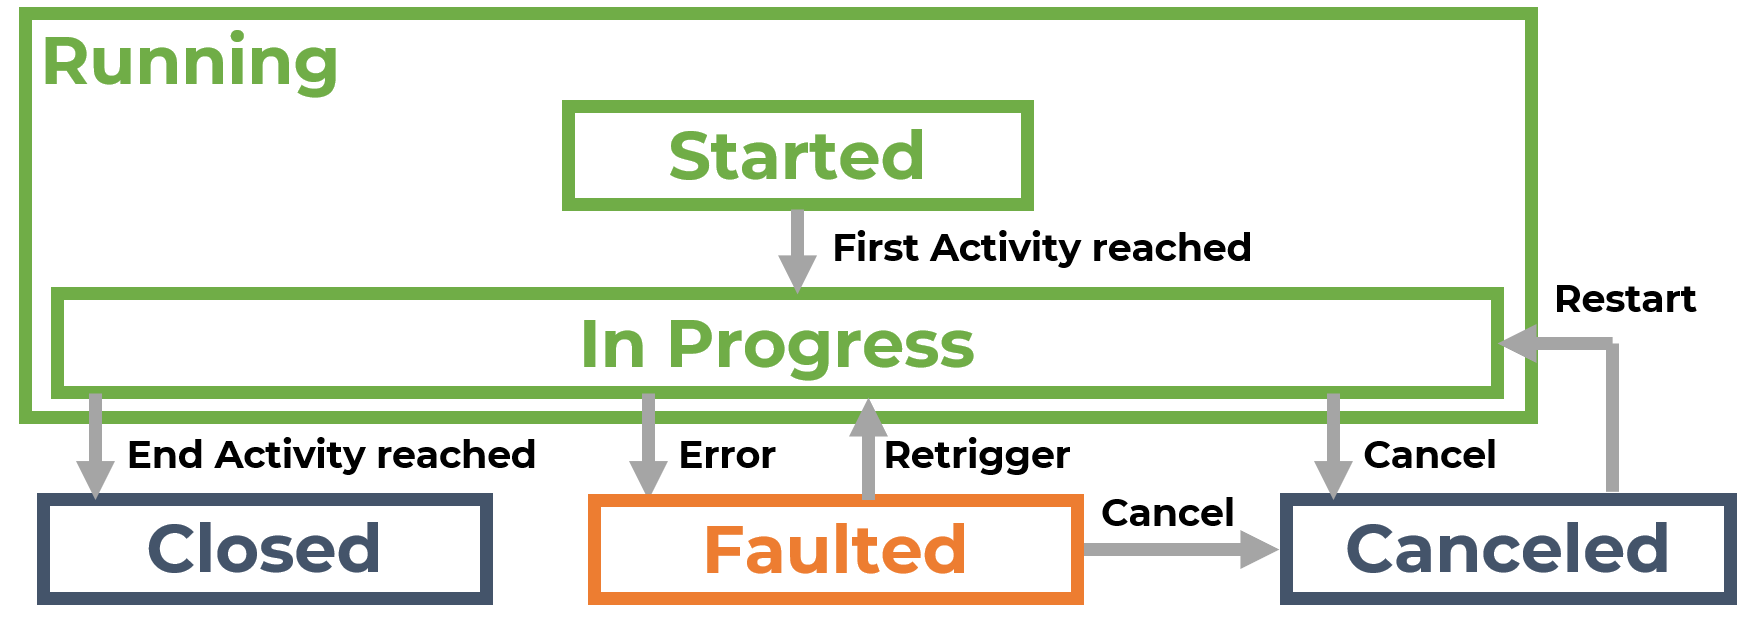 Each Instance moves through a Lifecycle always starting in Started and ending either in Canceled or Closed.